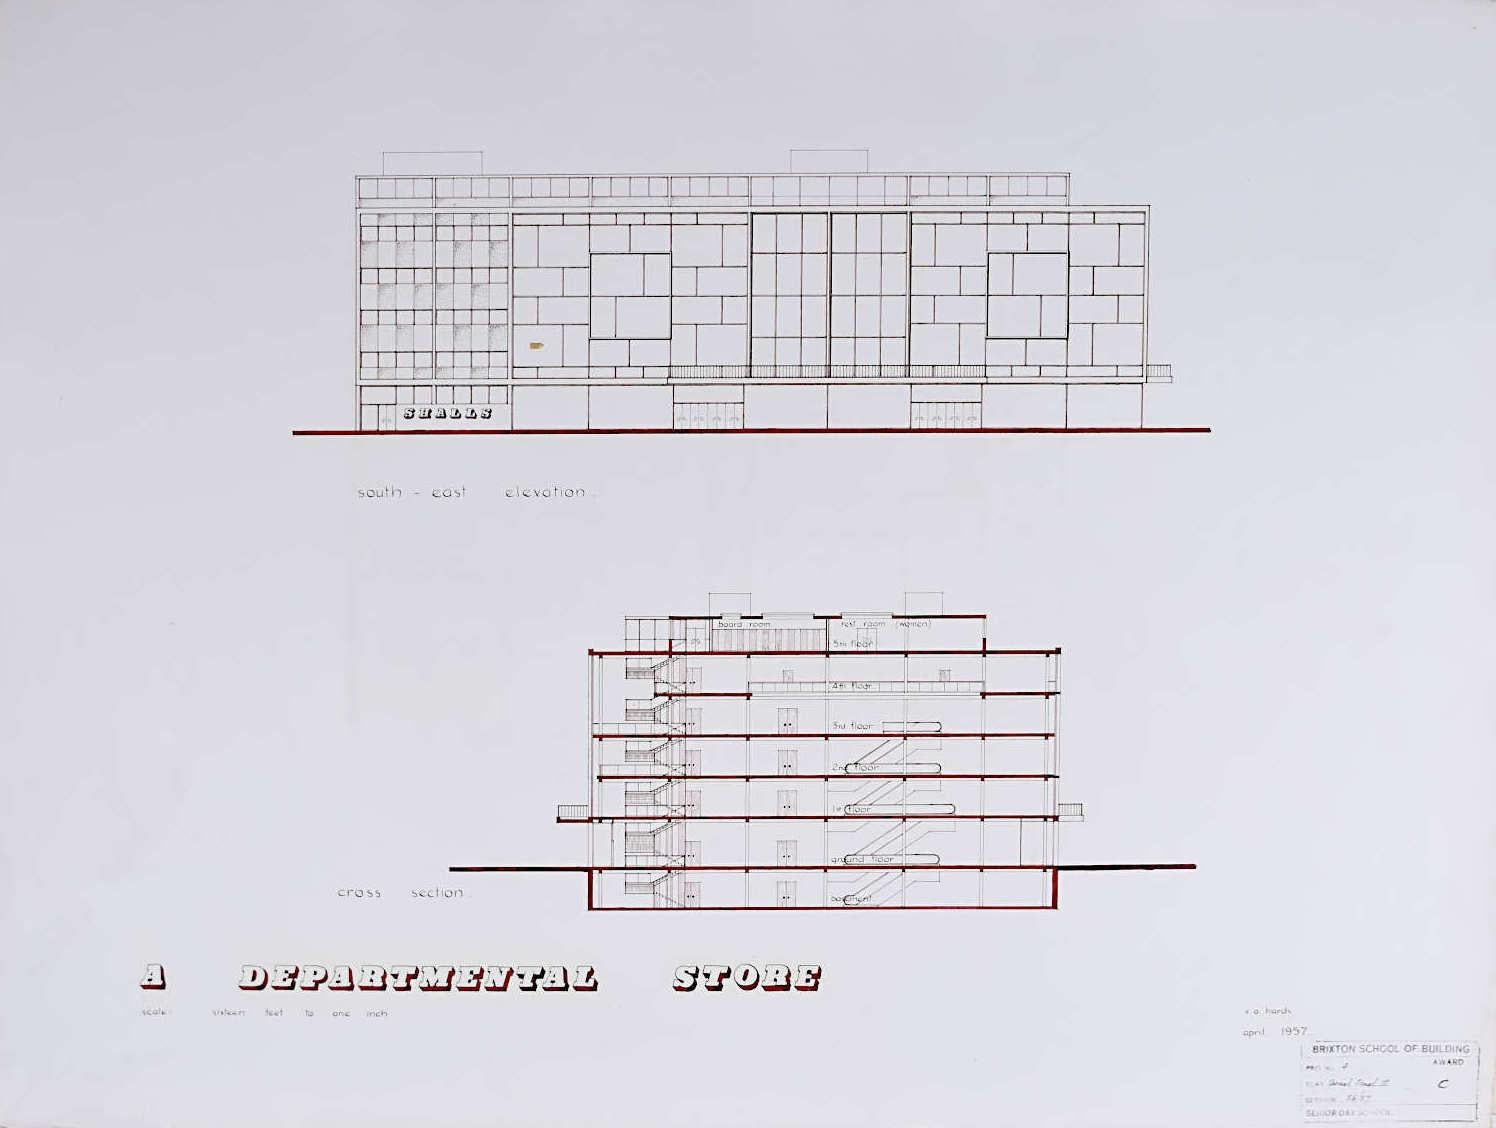 V A Hards Interior Art - Design for a Modernist department store mid-century architectural drawing